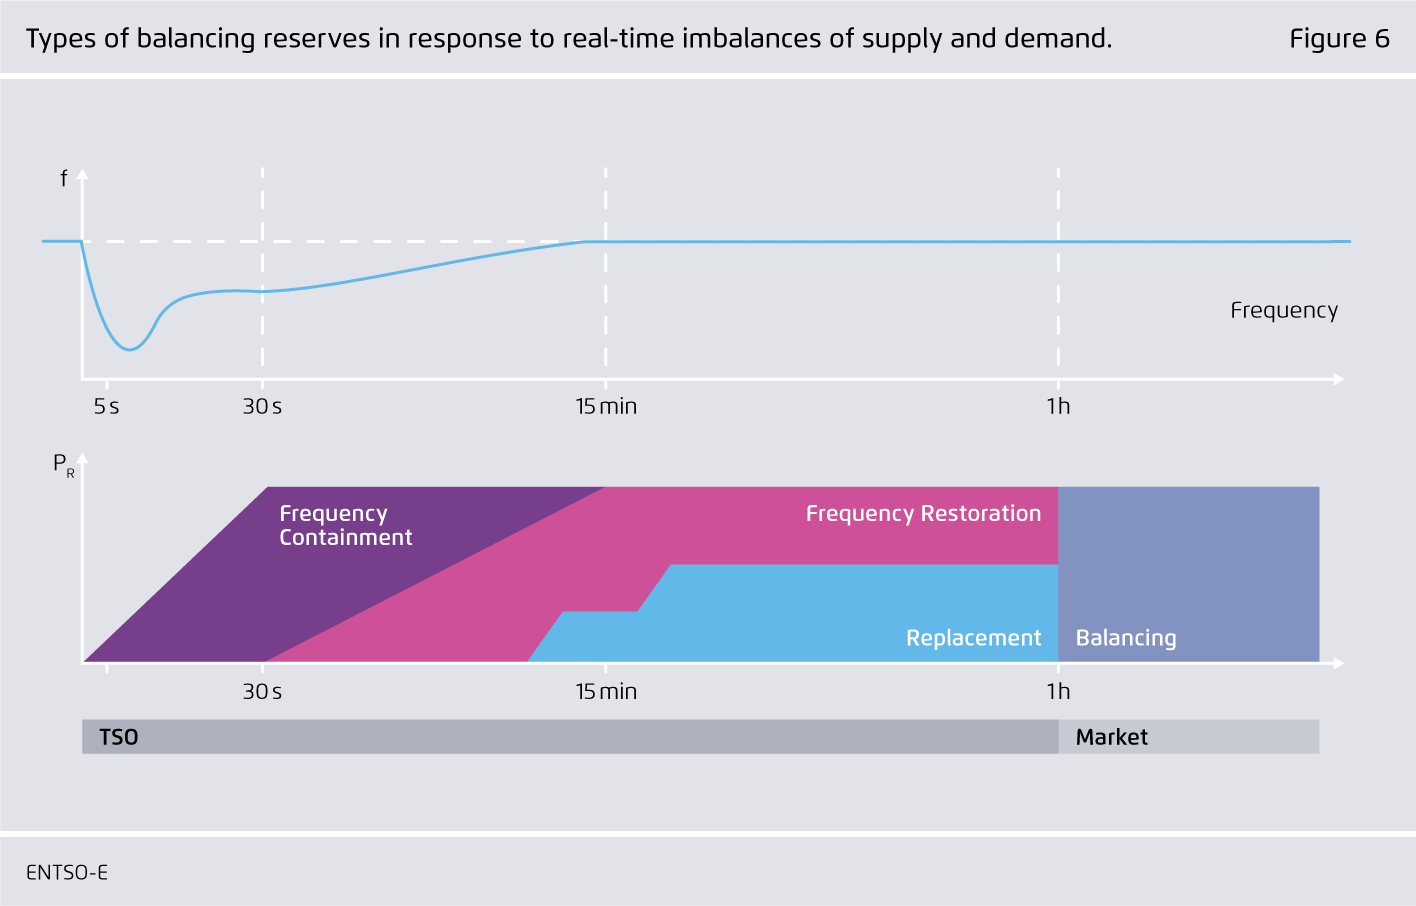 Preview for Types of balancing reserves in response to real-time imbalances of supply and demand.